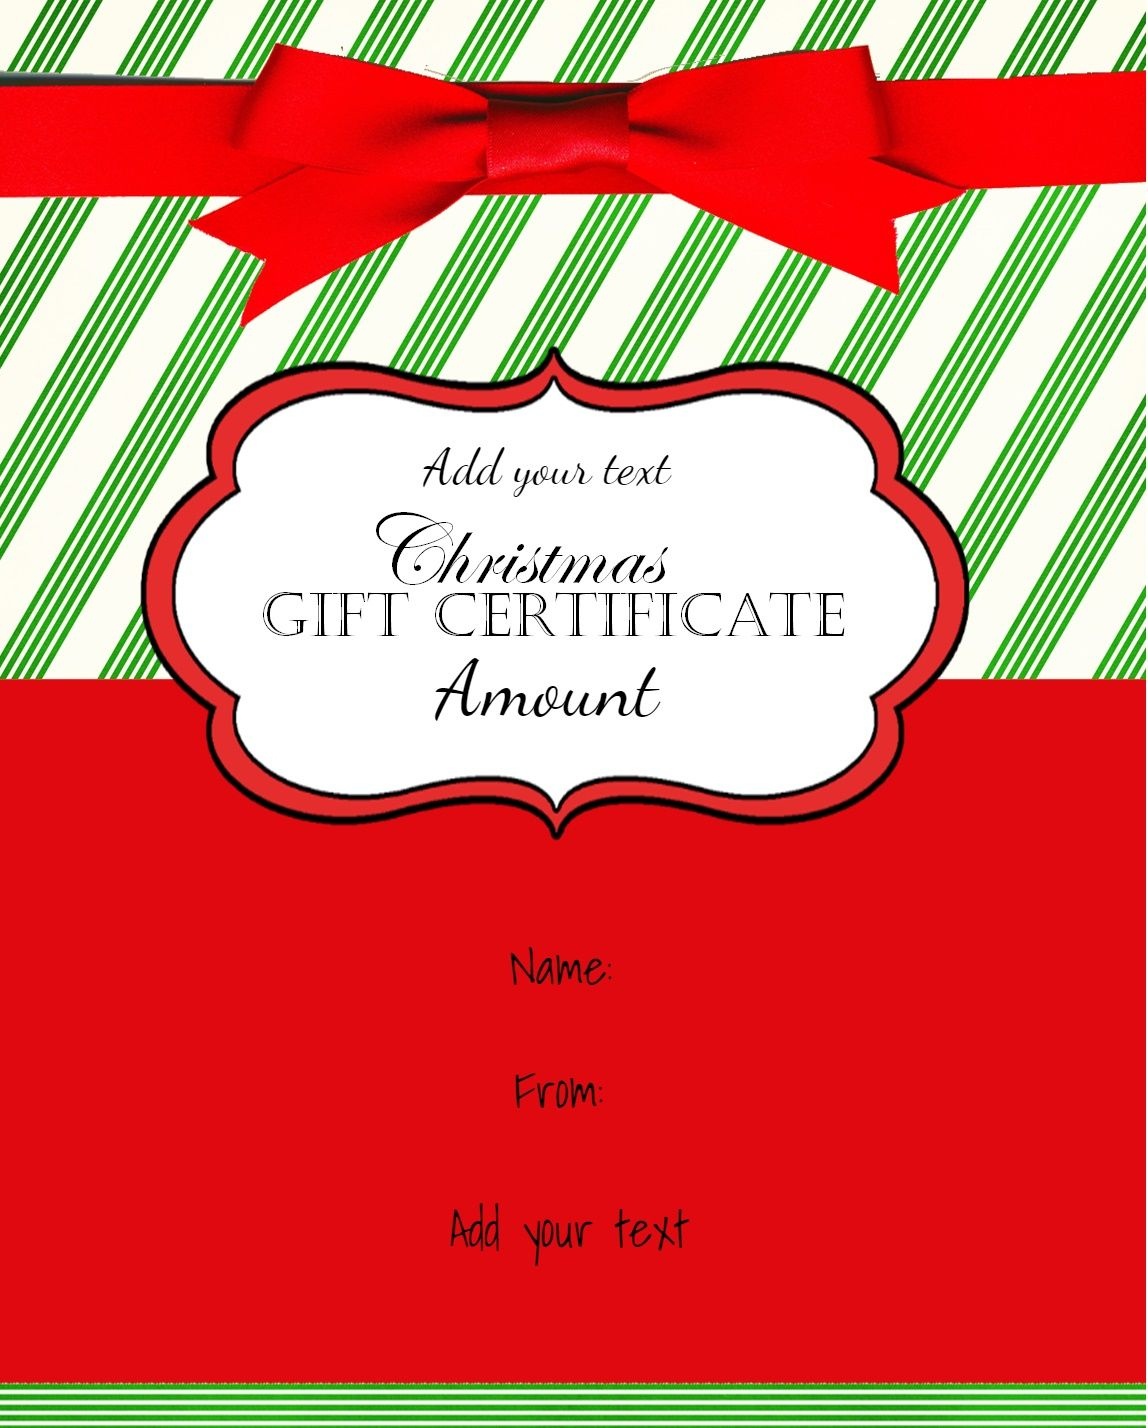 Pinamber M Ross On Gift Ideas | Christmas Gift Certificate - Free Printable Gift Certificate Christmas